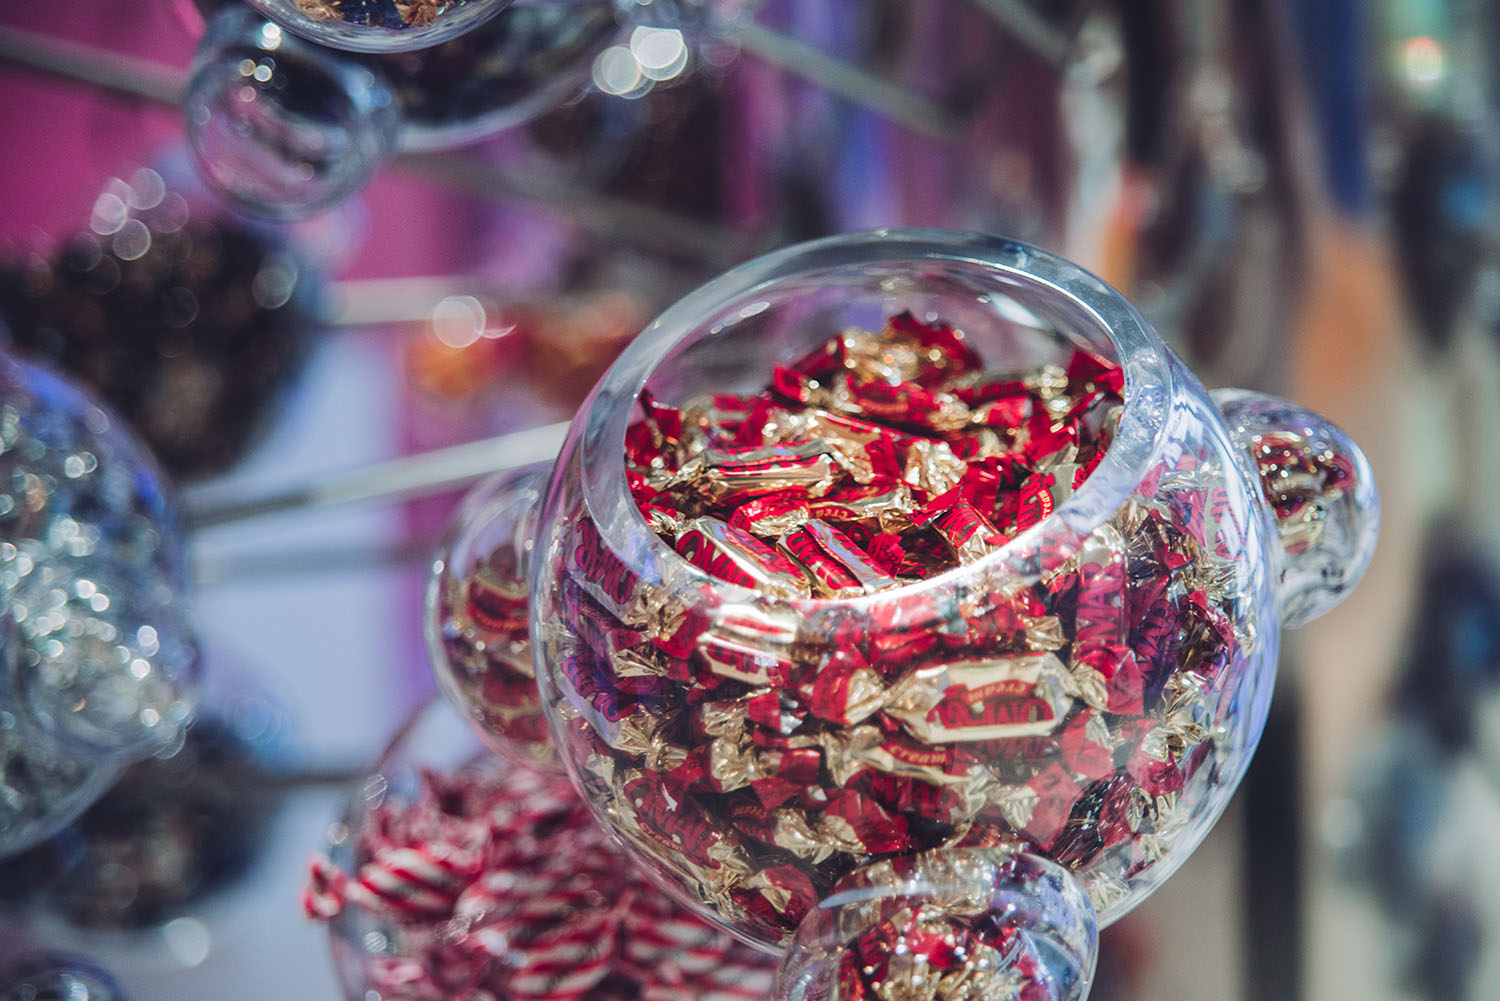 Eat as much candy as you want at Fazer Chocolate Factory